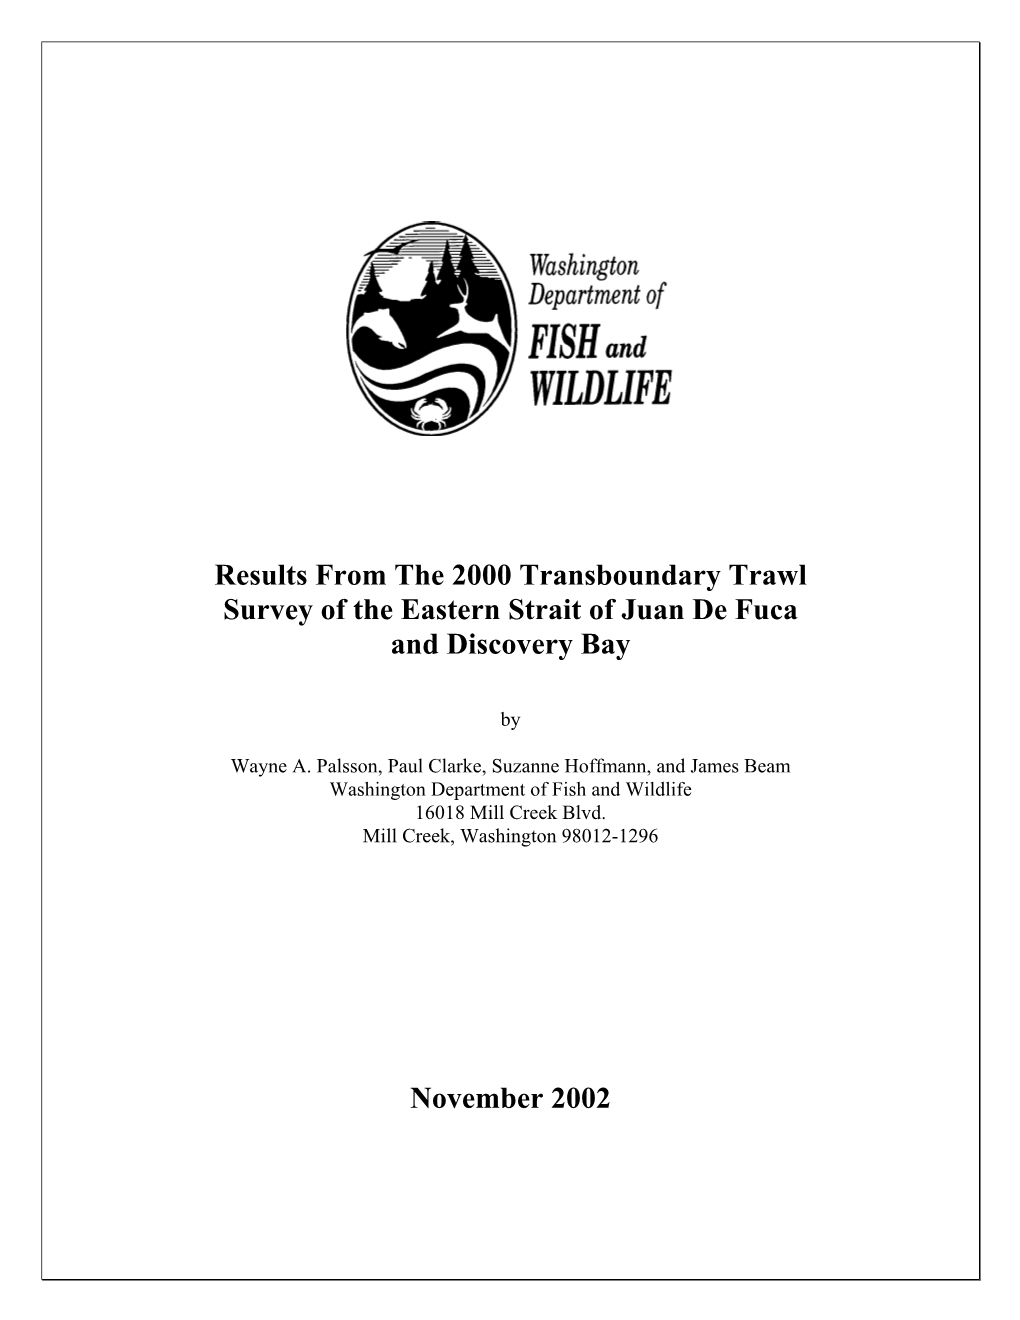 Results from the 2000 Transboundary Trawl Survey of the Eastern Strait of Juan De Fuca and Discovery Bay